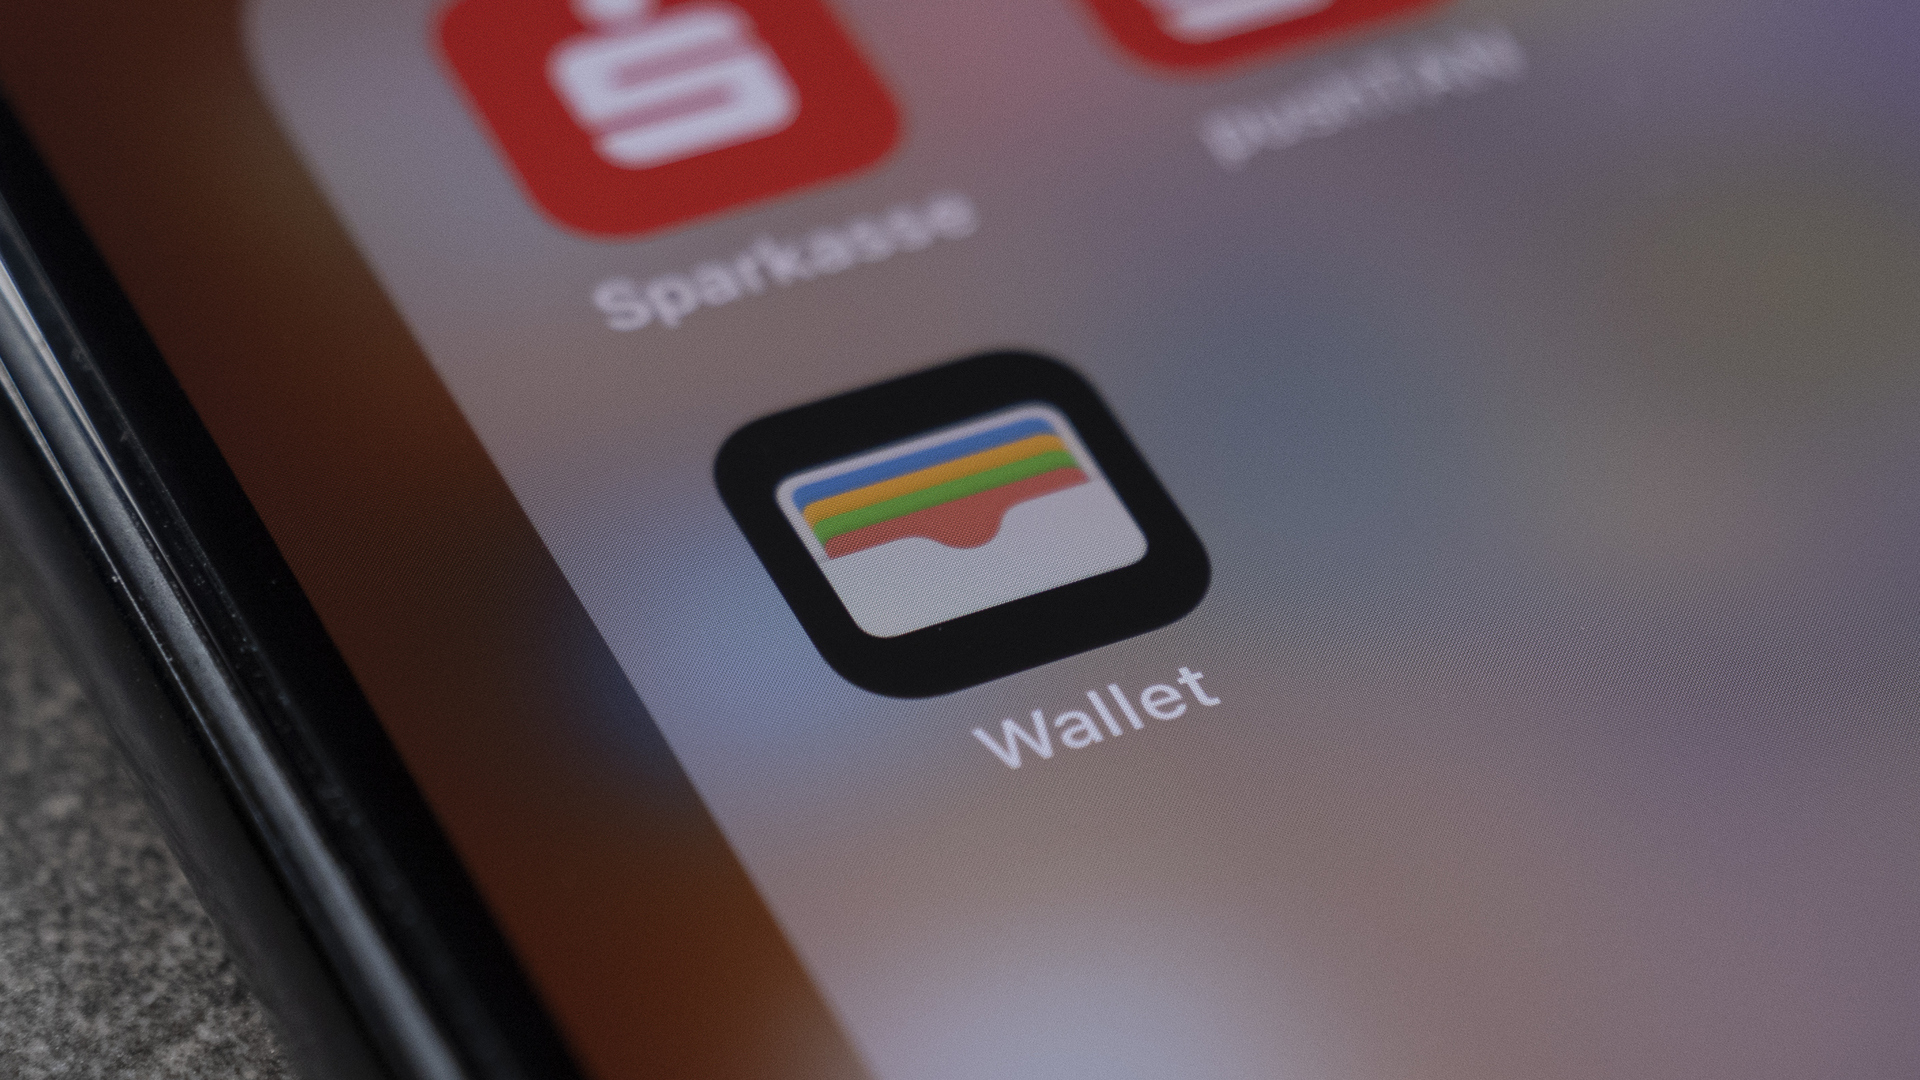 How to Add Apple Gift Cards to Wallet